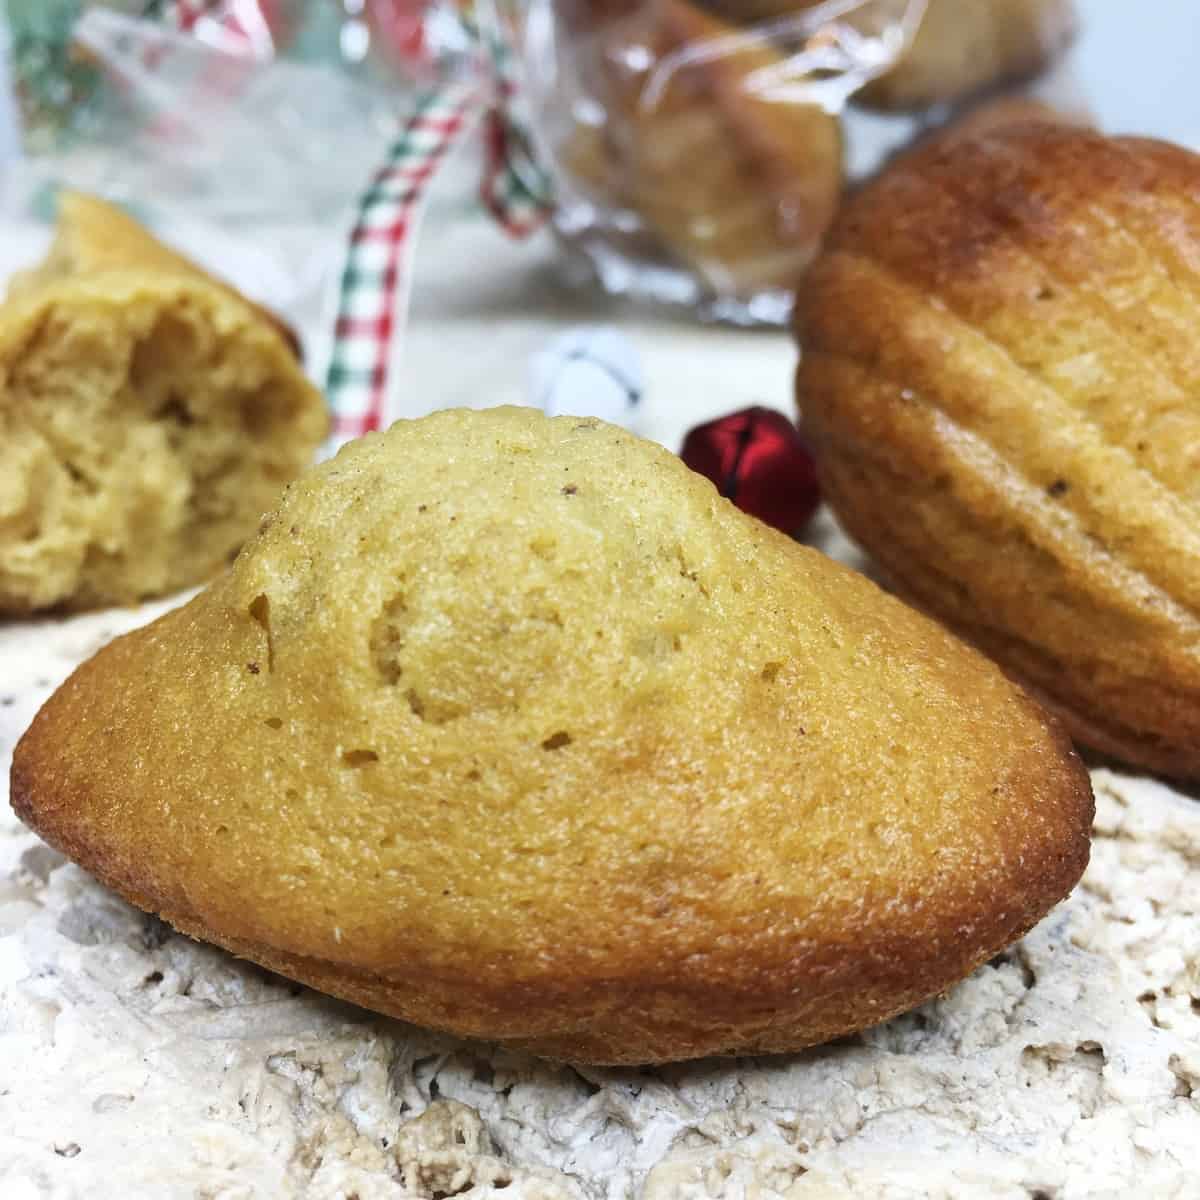 Gingerbread madeleines with a bag of these cakes in the background